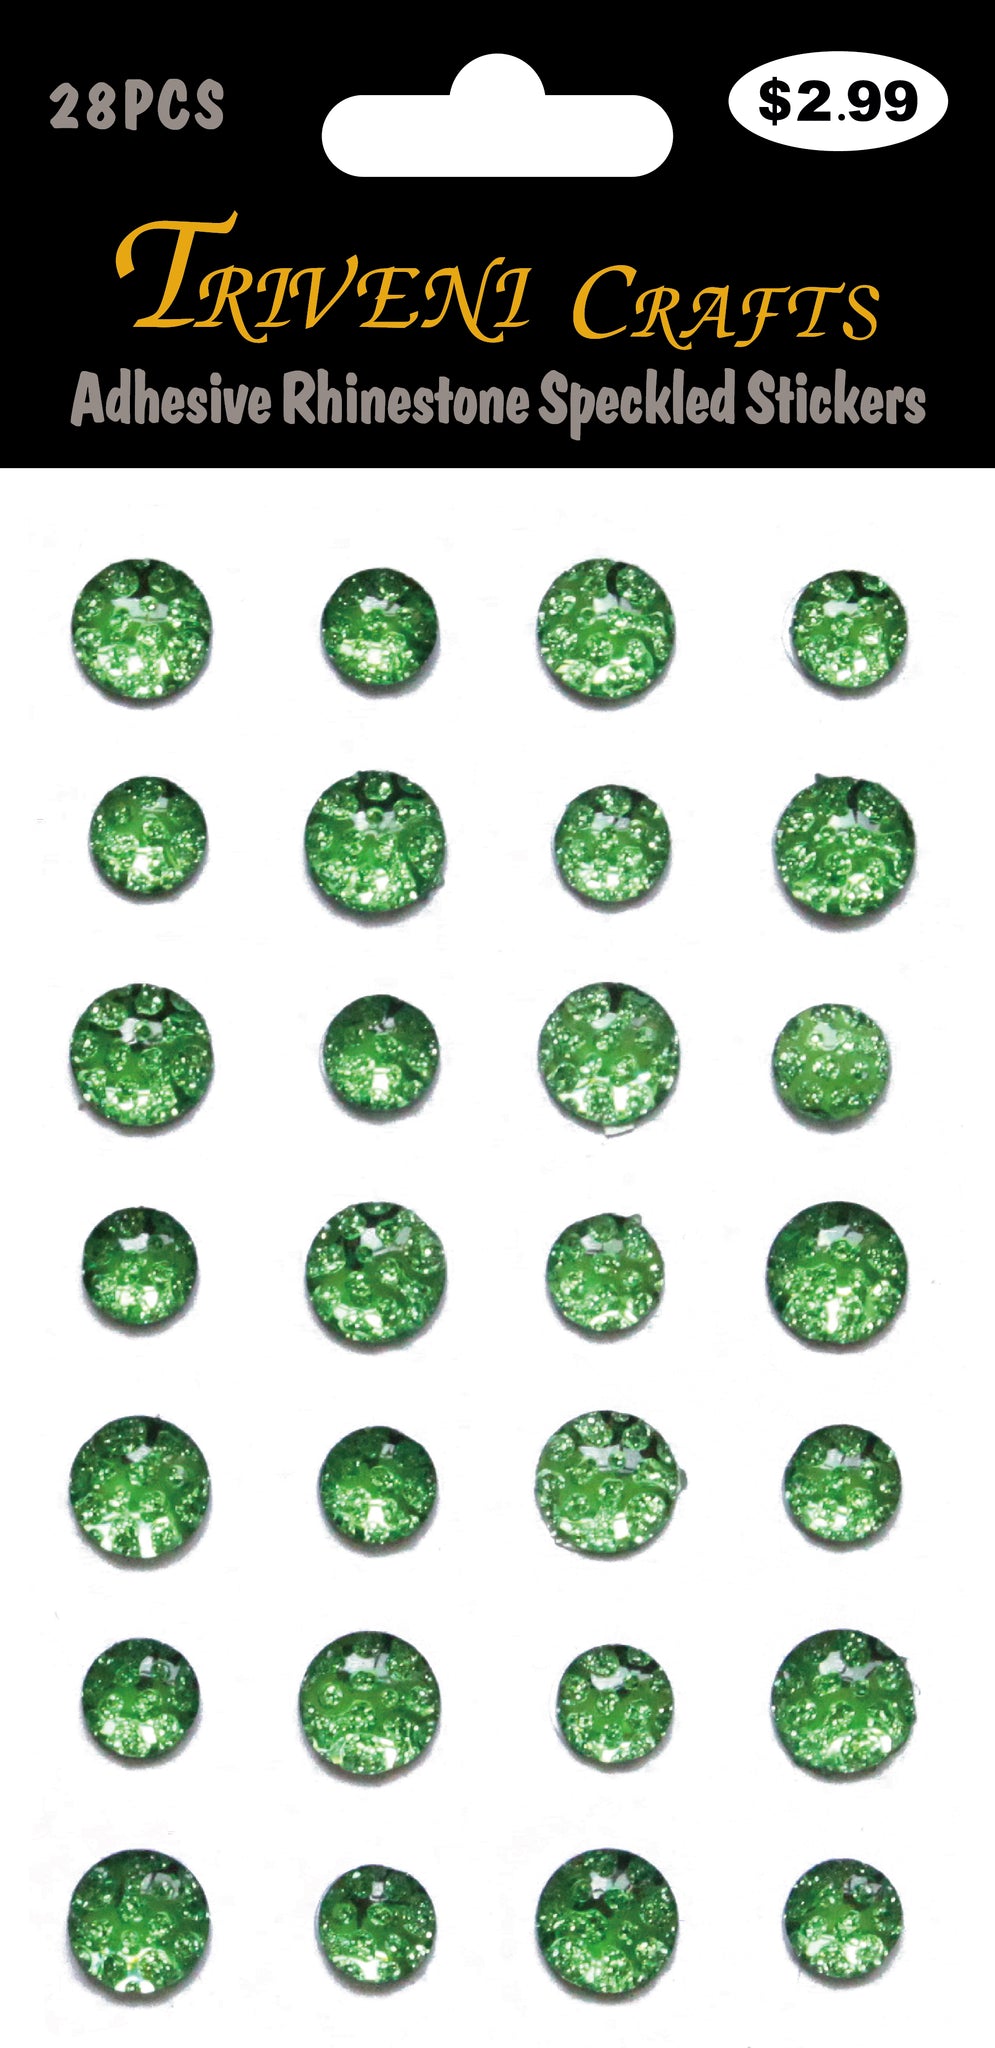 Adhesive Rhinestone Speckled Stickers - Green